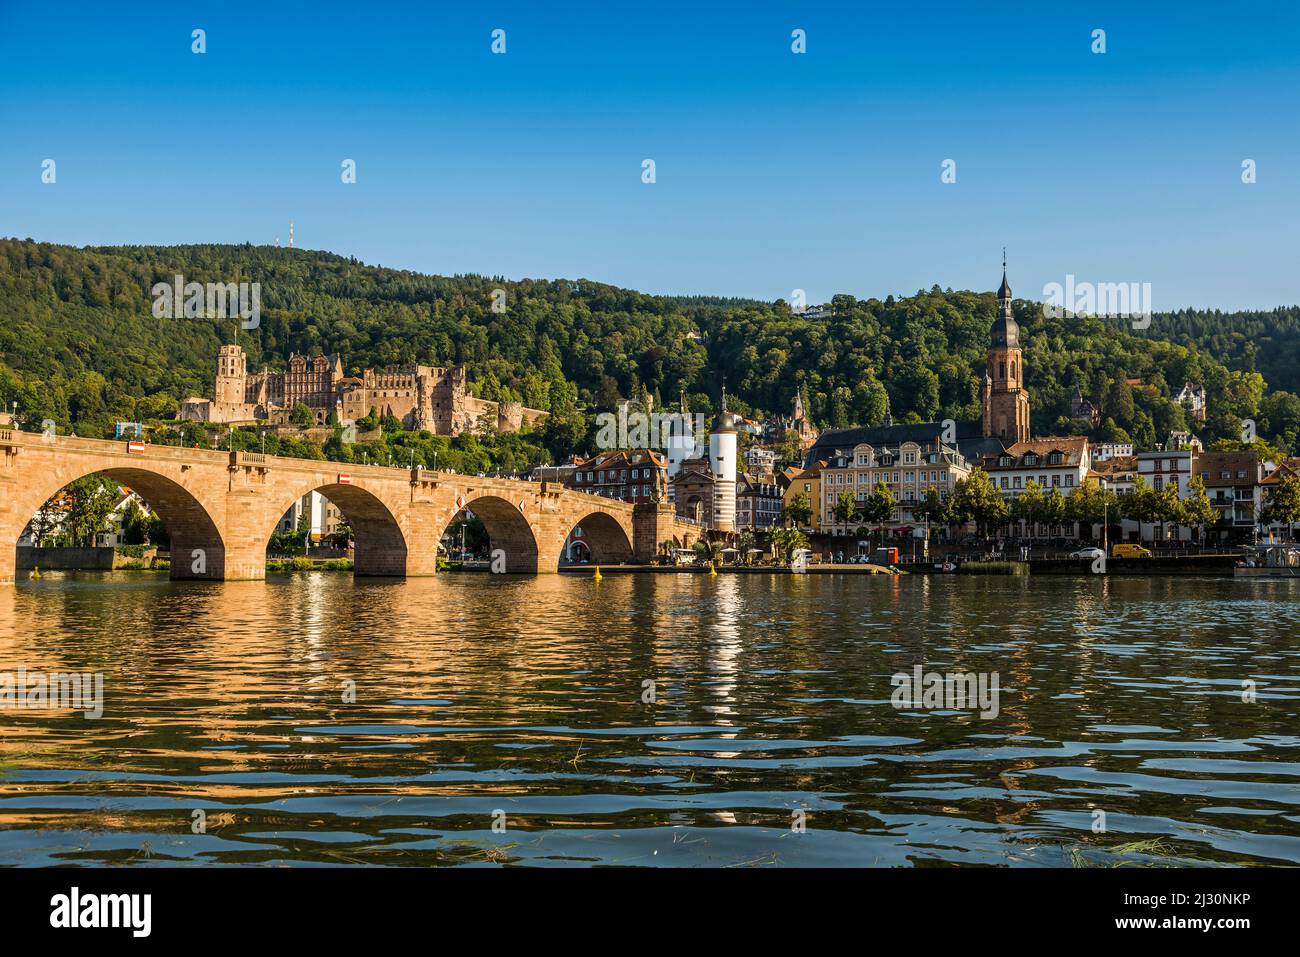 Old bridge over the Neckar with castle and old town, Heidelberg, Baden-Württemberg, Germany Stock Photo